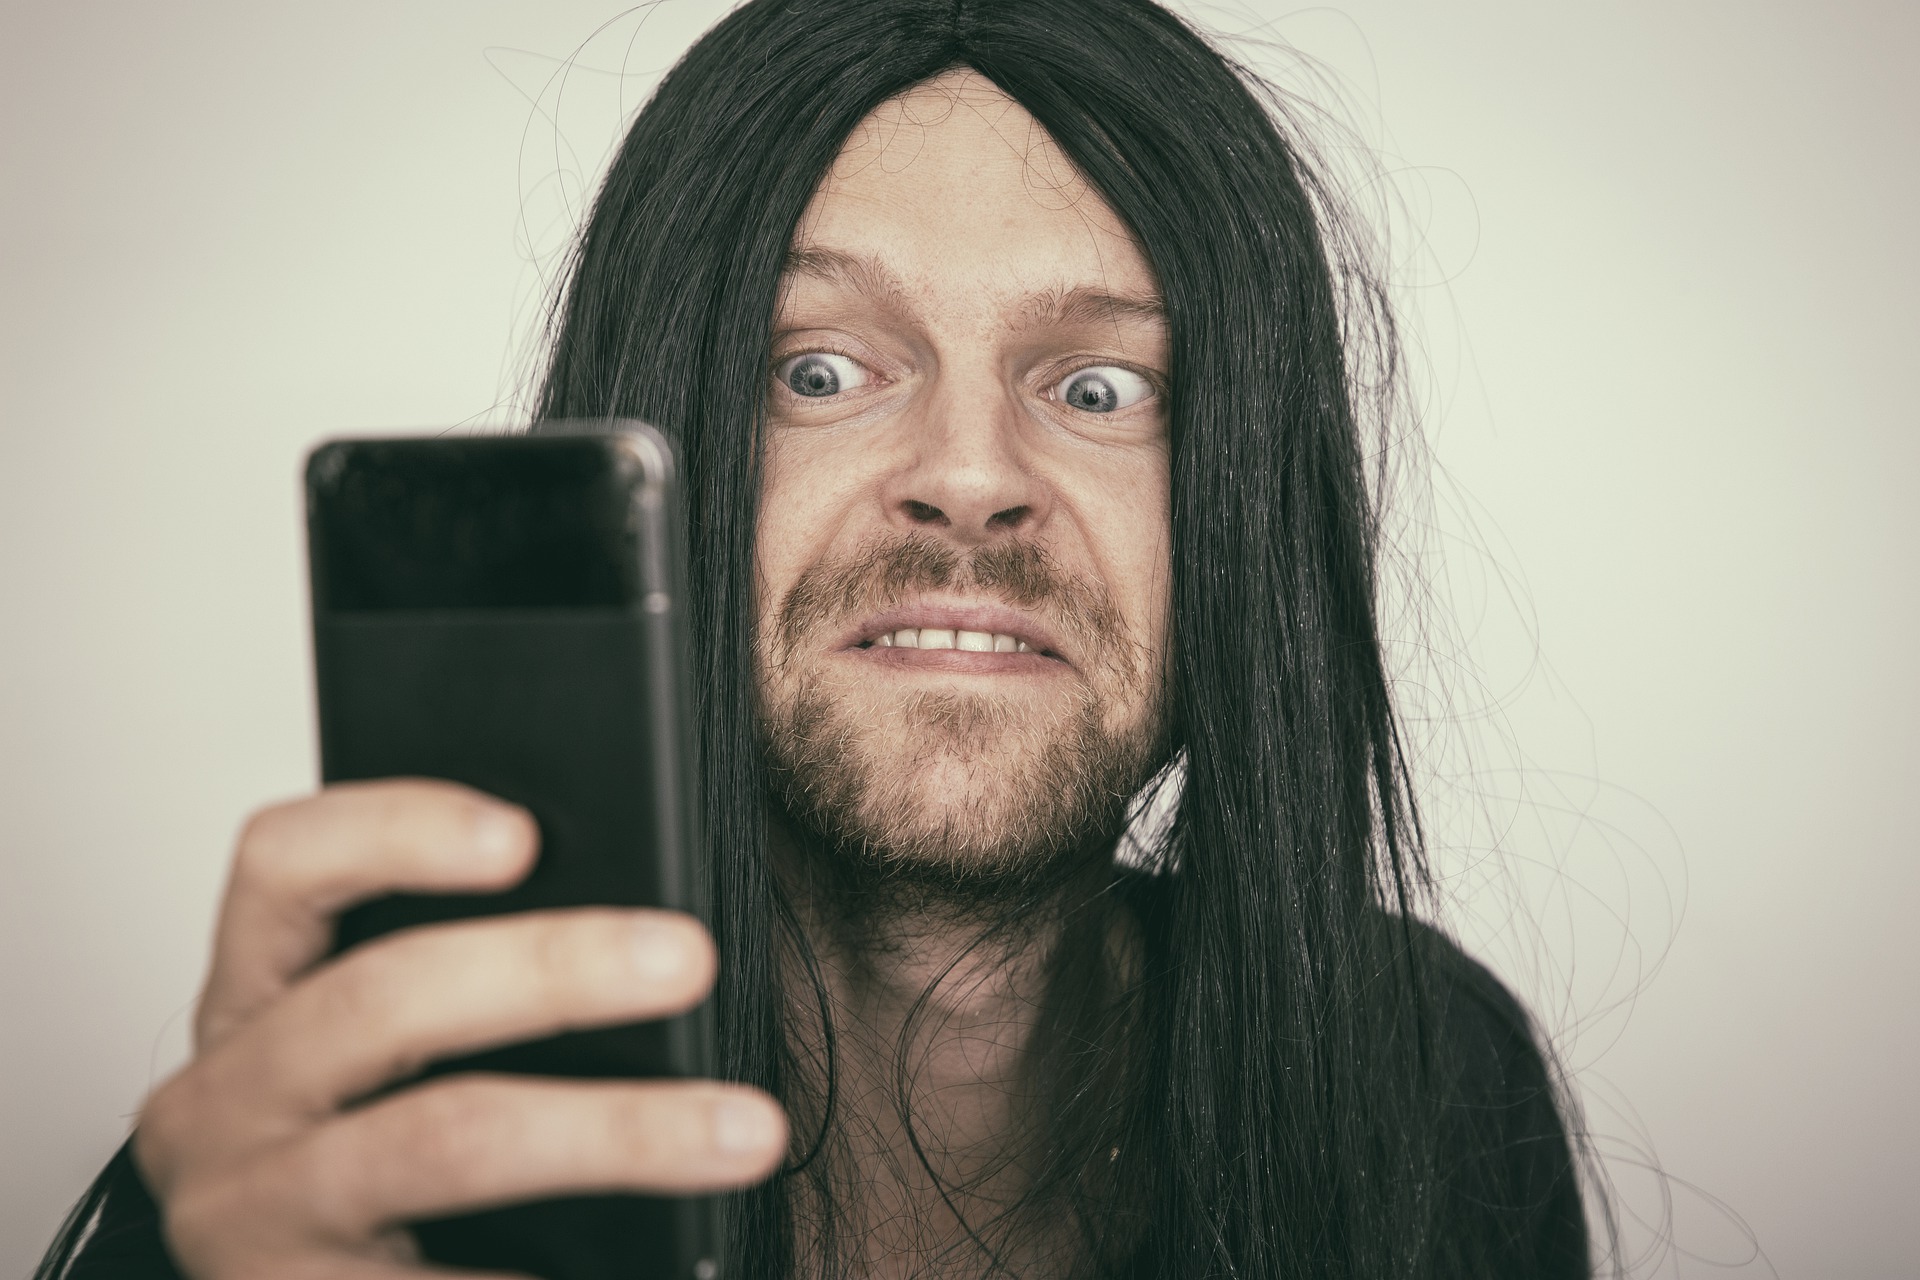 a man with long hair holding a cell phone